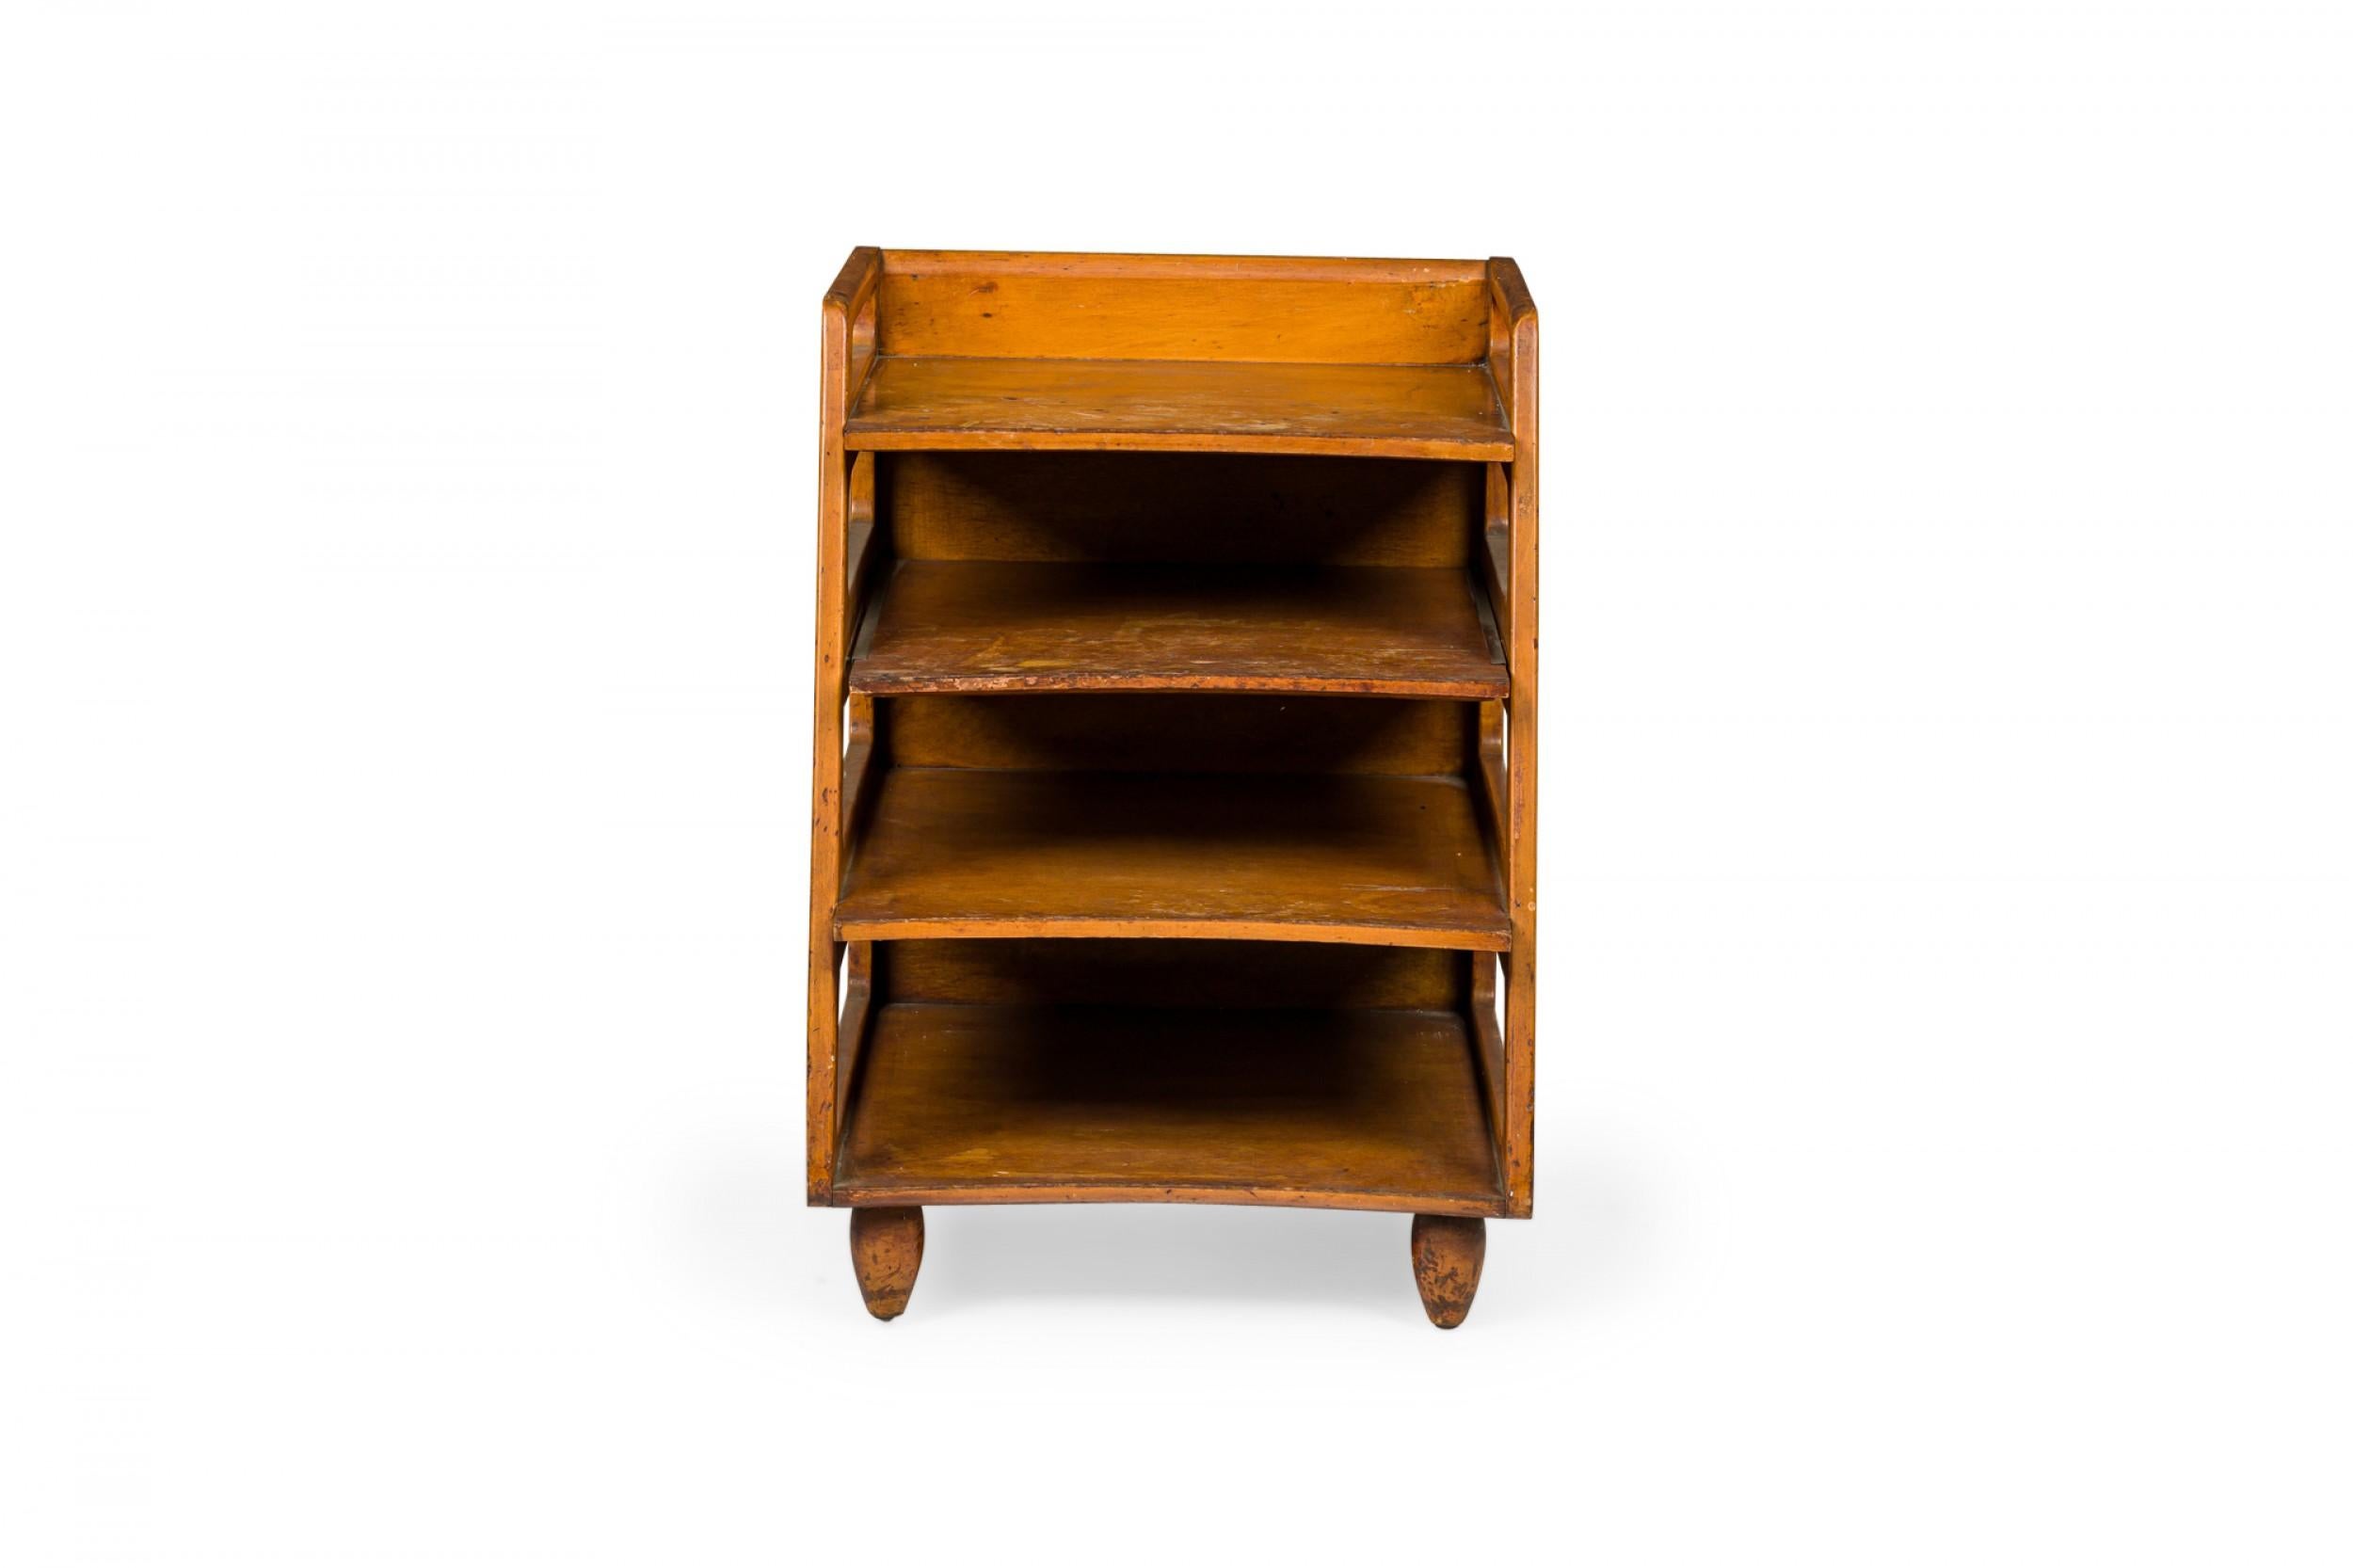 PAIR of American Mid-Century wooden magazine tables with square top surrounded on three sides with shallow galleries open on two sides above three lower compartments with curved shelf fronts. (KITTINGER FURNITURE COMPANY)(PRICED AS PAIR)
